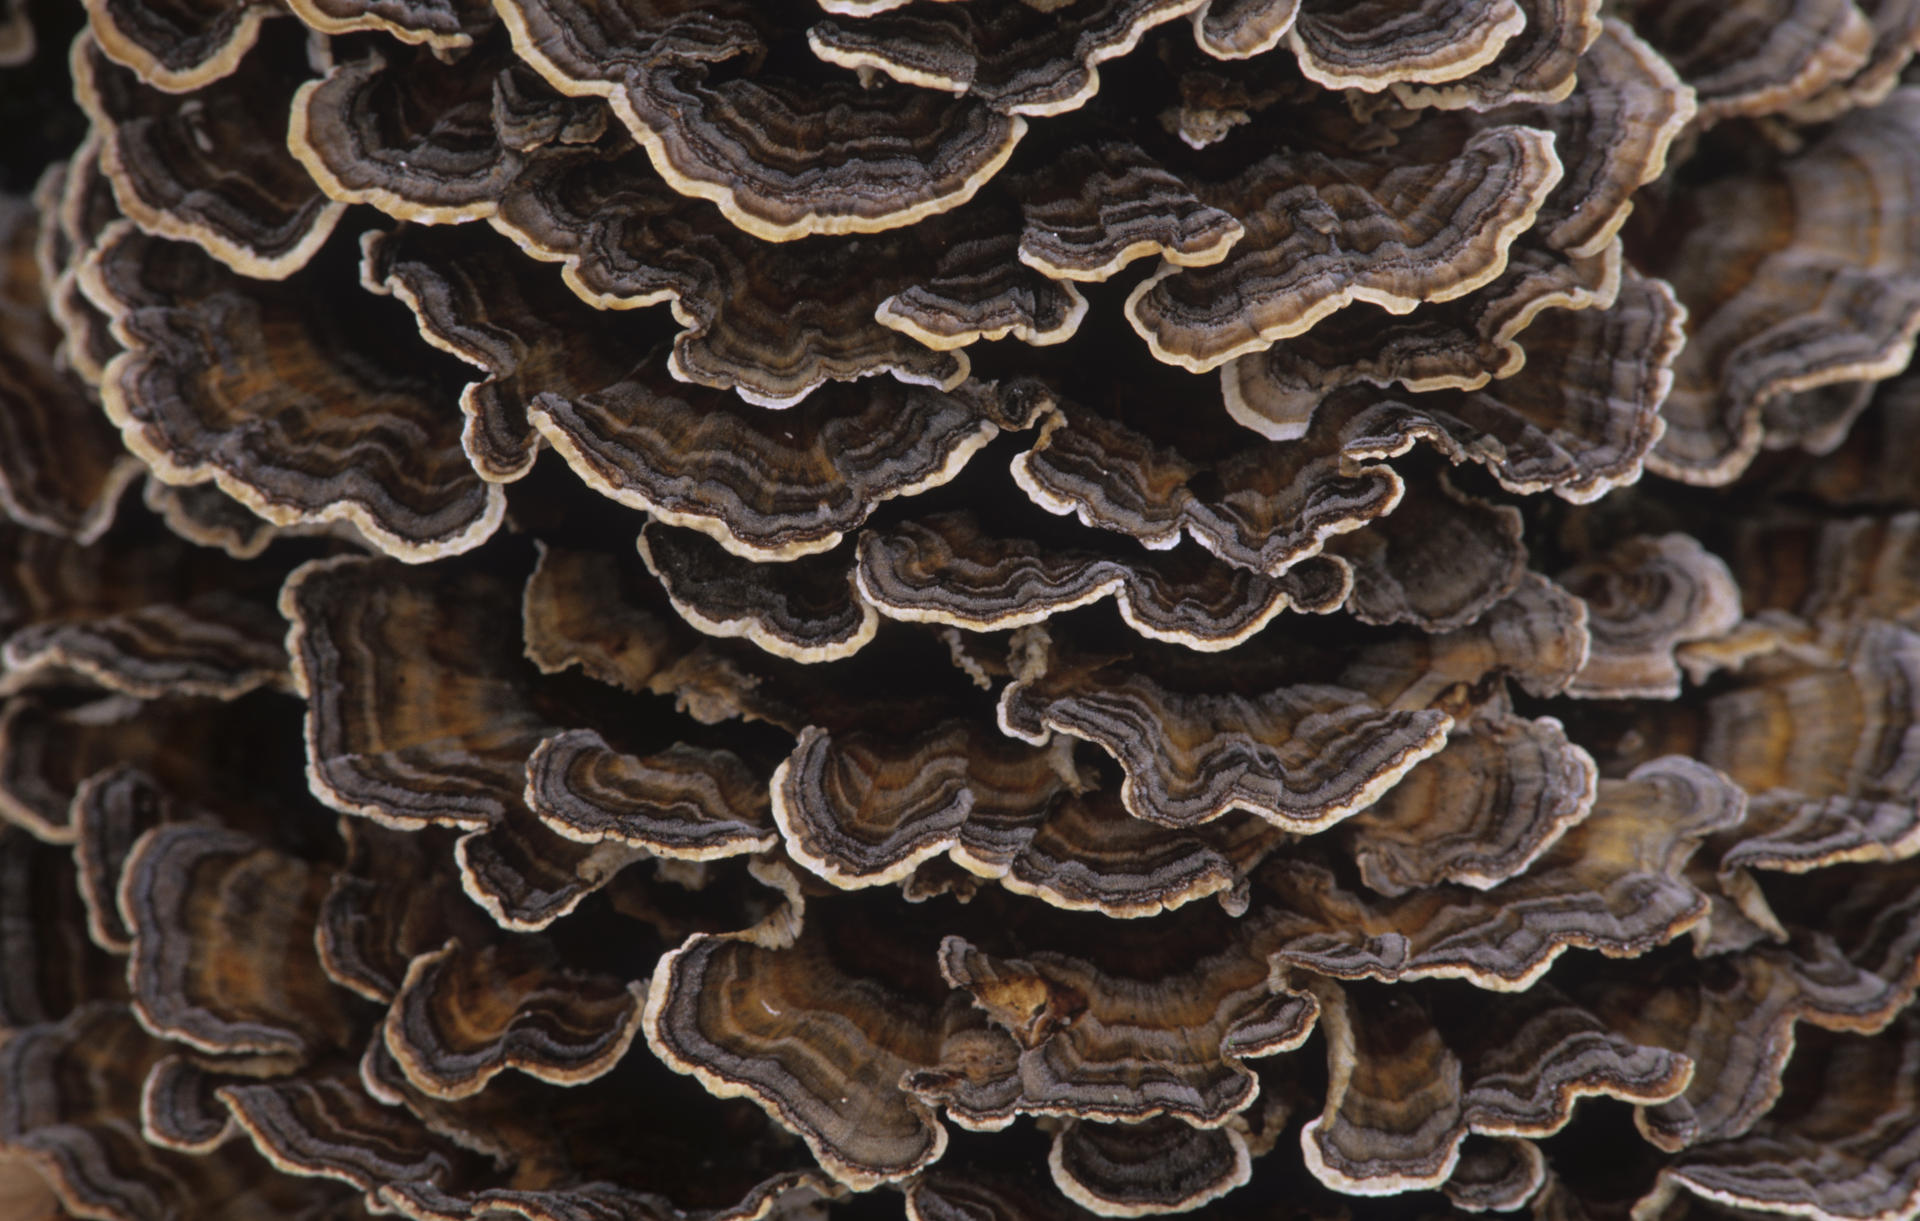 Yunzhi, or turkey tail mushrooms were used in the Ming dynasty for their medicinal properties. Photo: Corbis